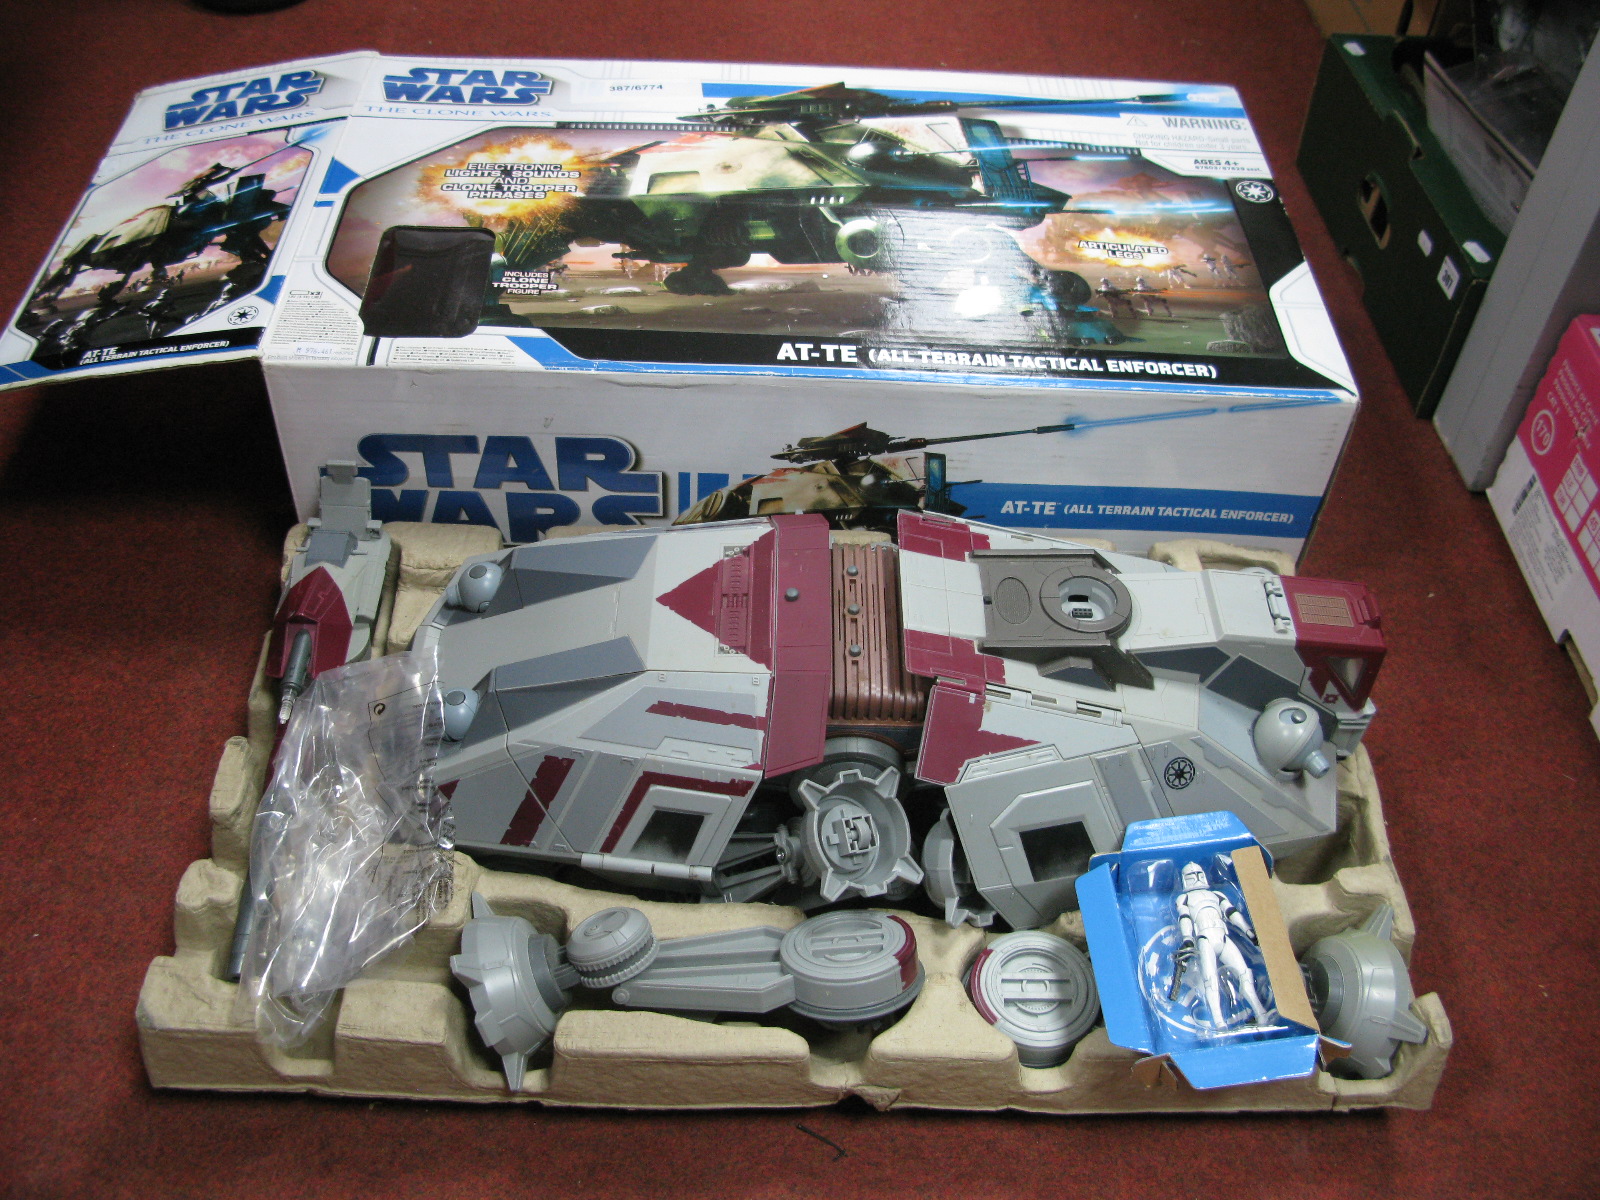 A Boxed Modern Star Wars The Clone Wars AT-TE (All Terrain Tactical Enforcer) by Hasbro (Circa